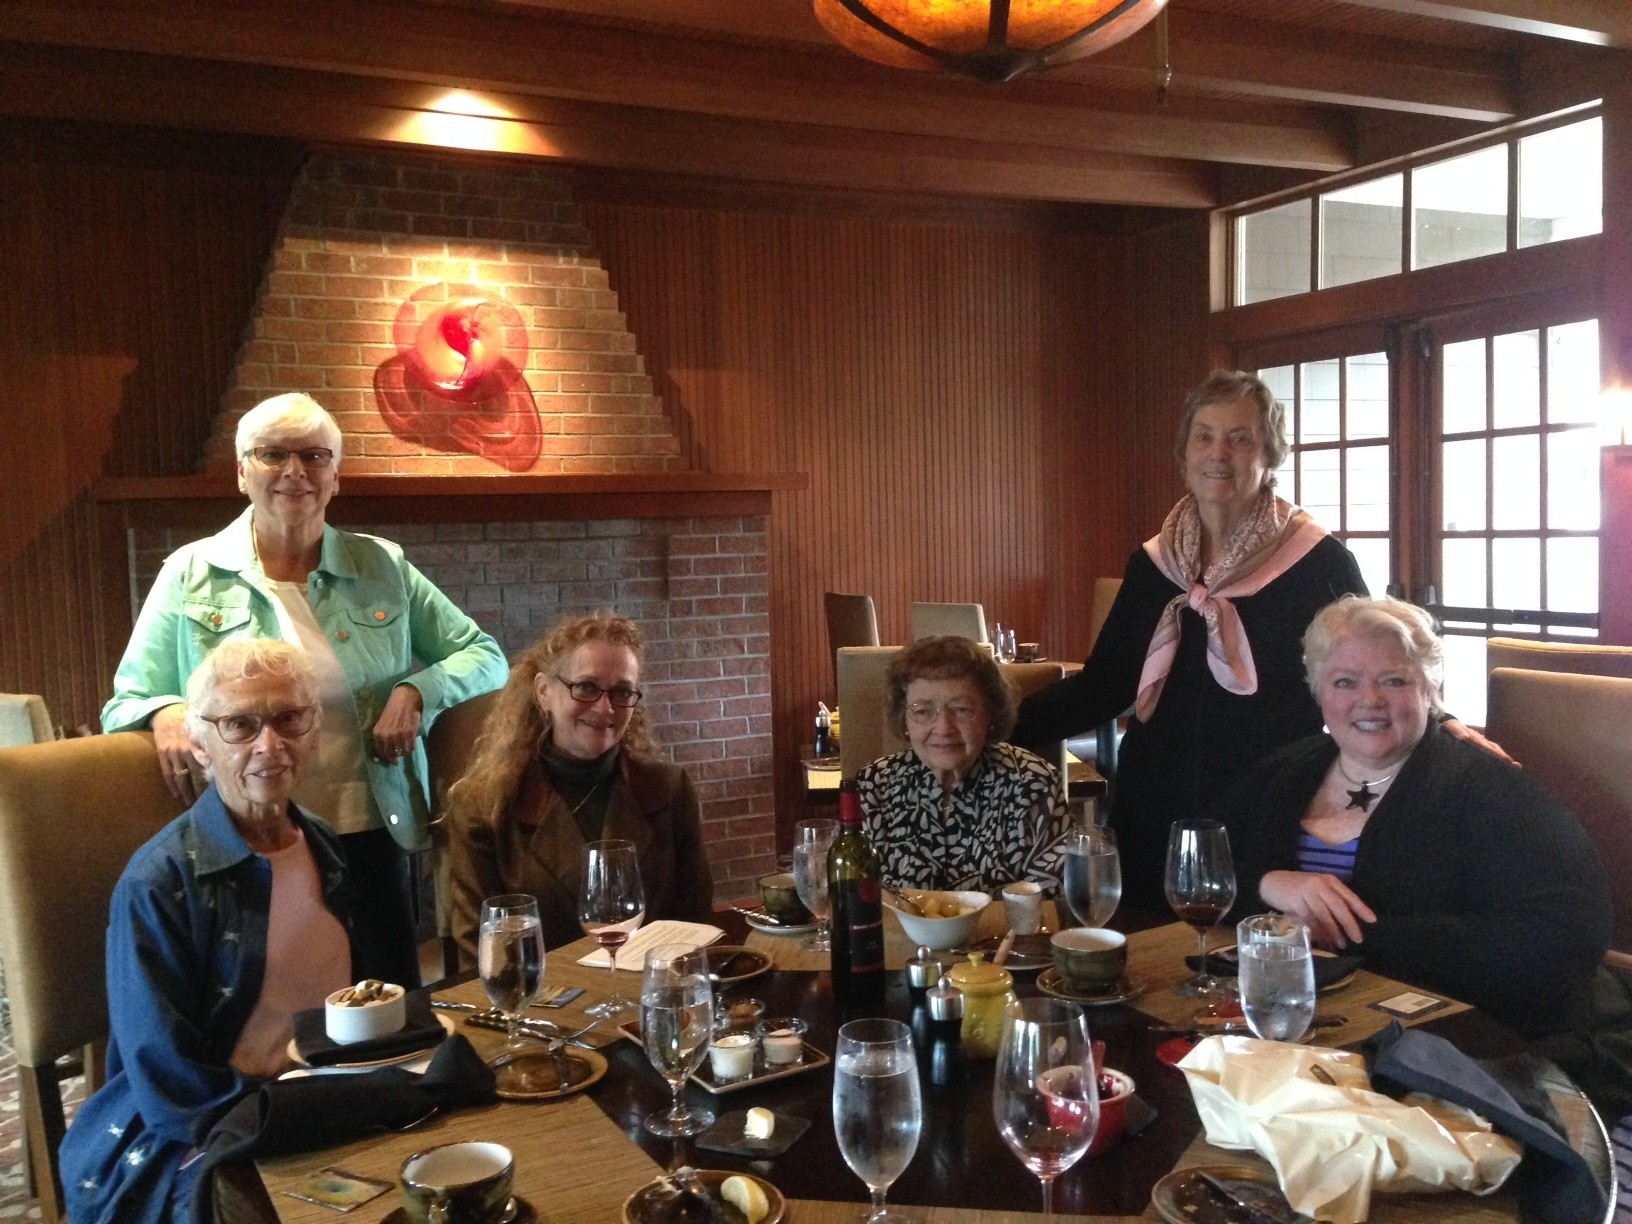 Some current members of the Happy Valley Women’s Club.